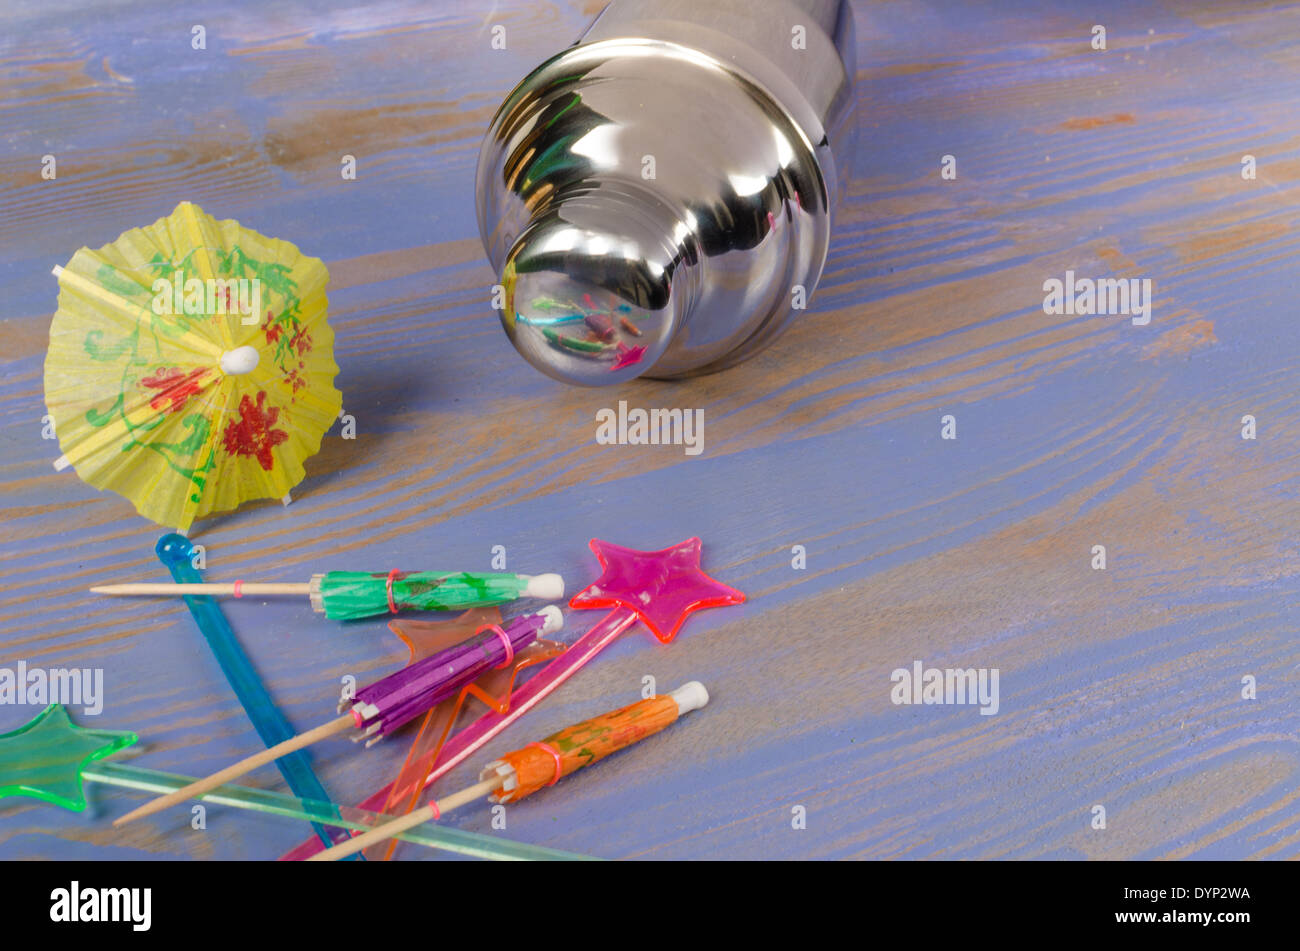 Cocktail shaker and an assortment of decorative accessories Stock Photo